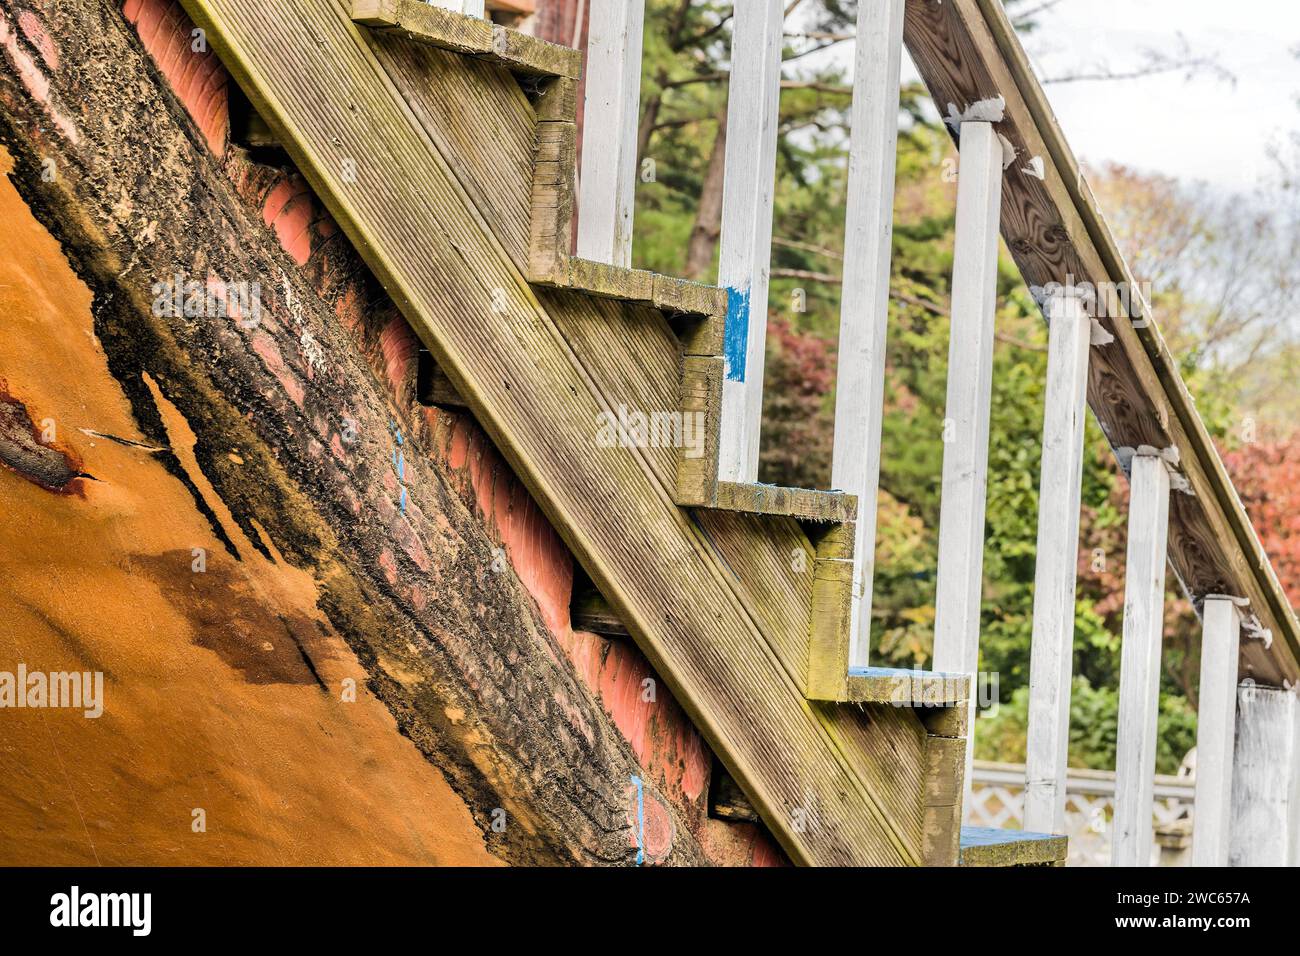 Closeup of wooden outdoor staircase on old abandoned building Stock Photo